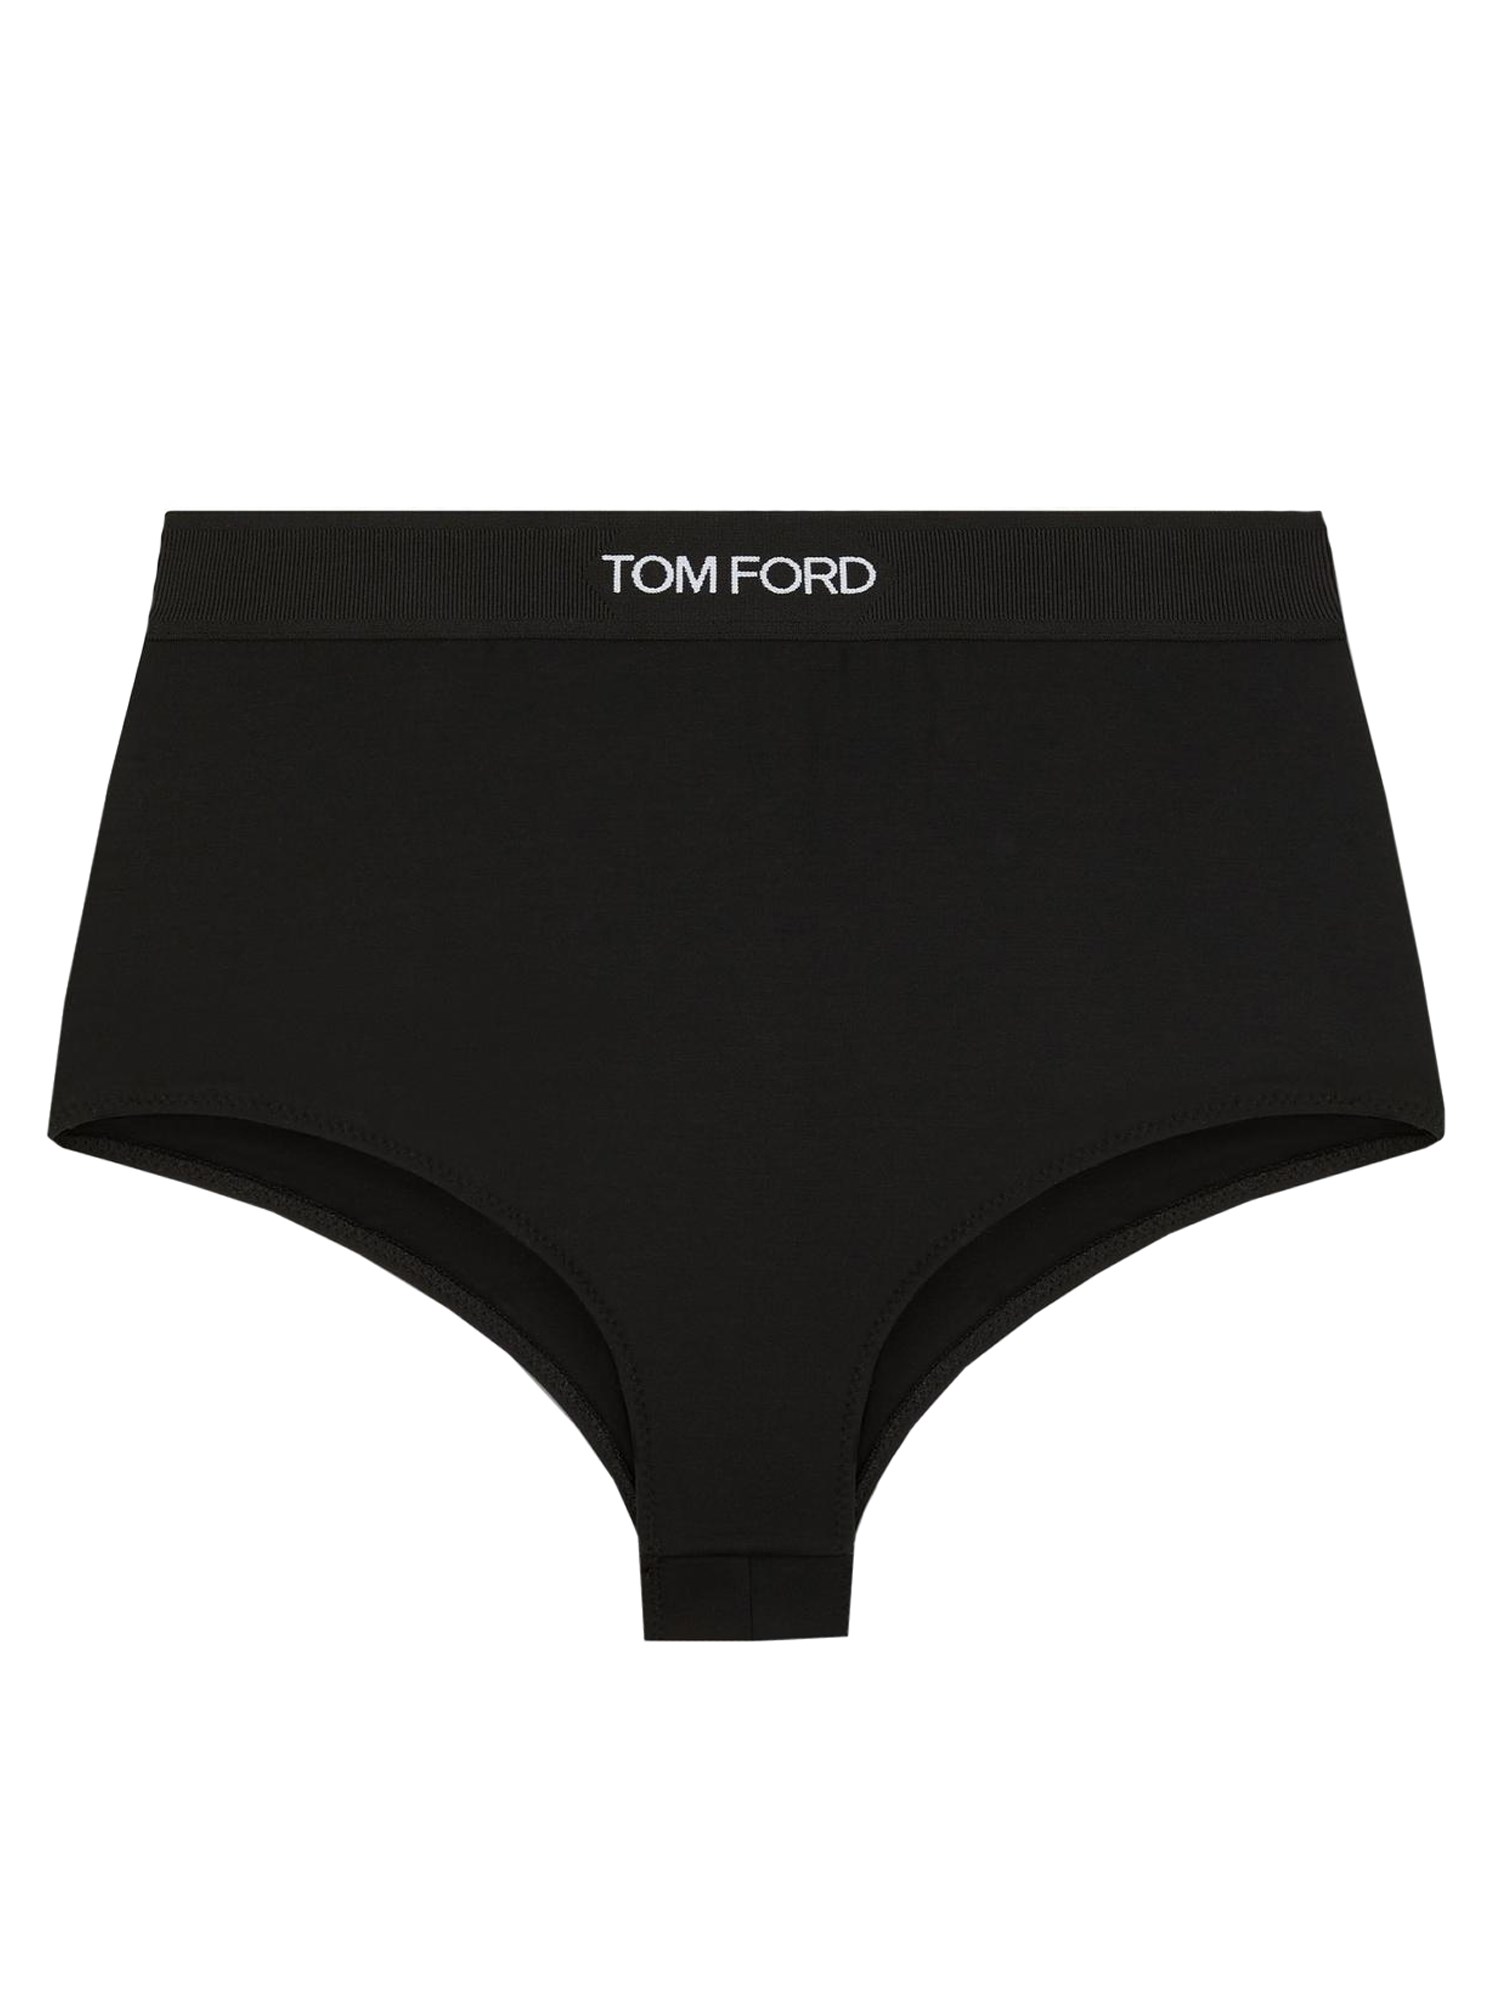 tom ford briefs with logo